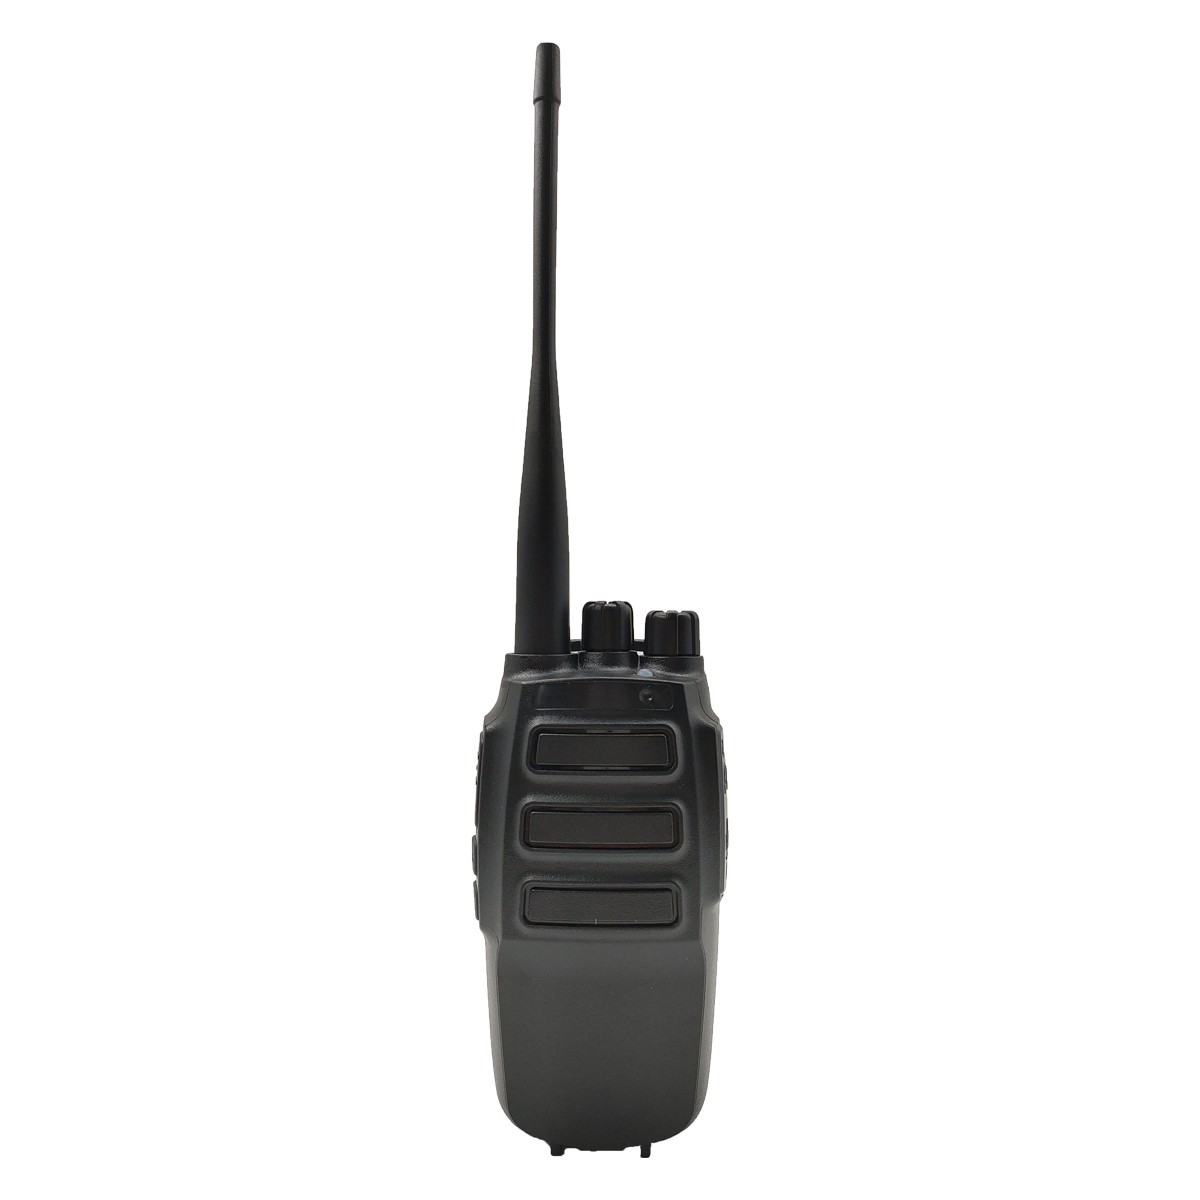 QYT new single band vhf or uhf long distance walkie talkie AH-67H